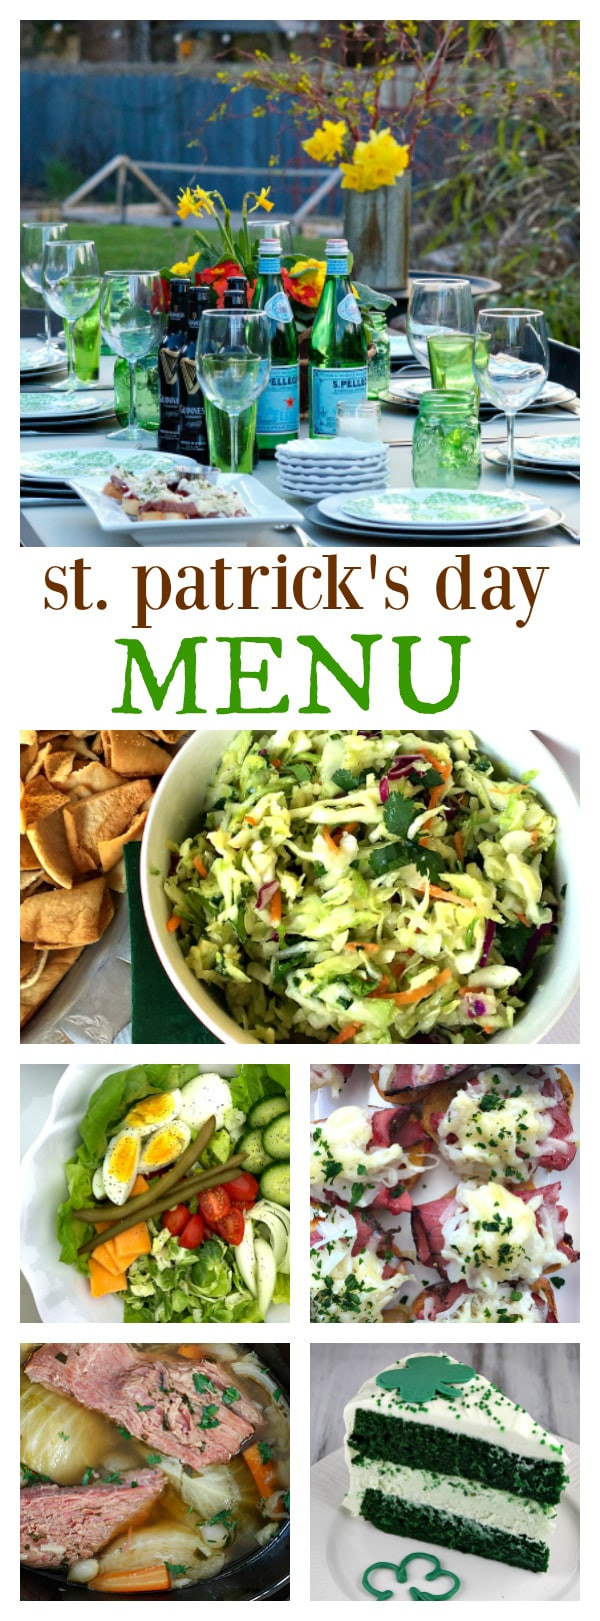 St Patrick's Day Meal Ideas
 St Patrick s Day Menu Reluctant Entertainer